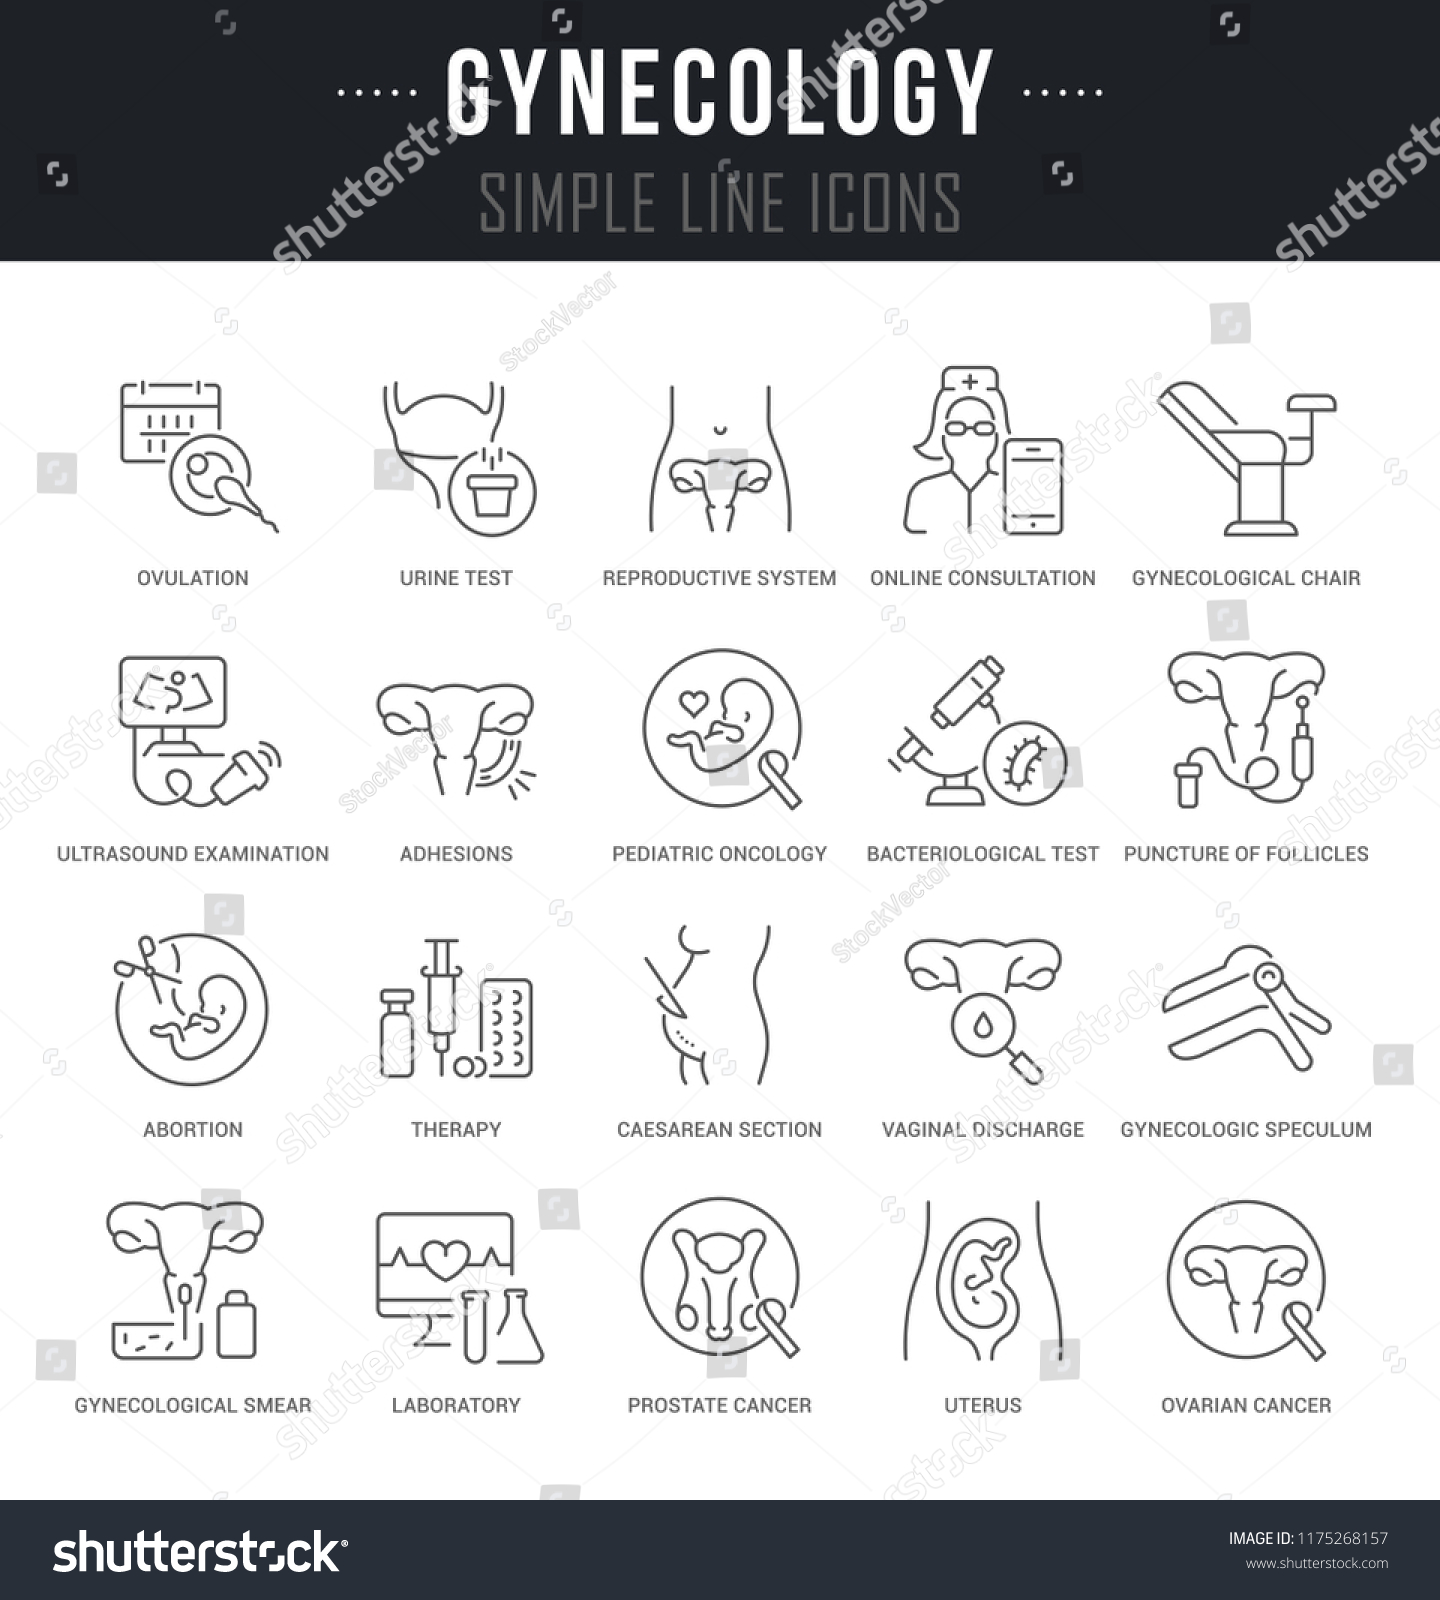 Set Of Linear Icons Of Gynecology With Names Royalty Free Stock Vector 1175268157 2074